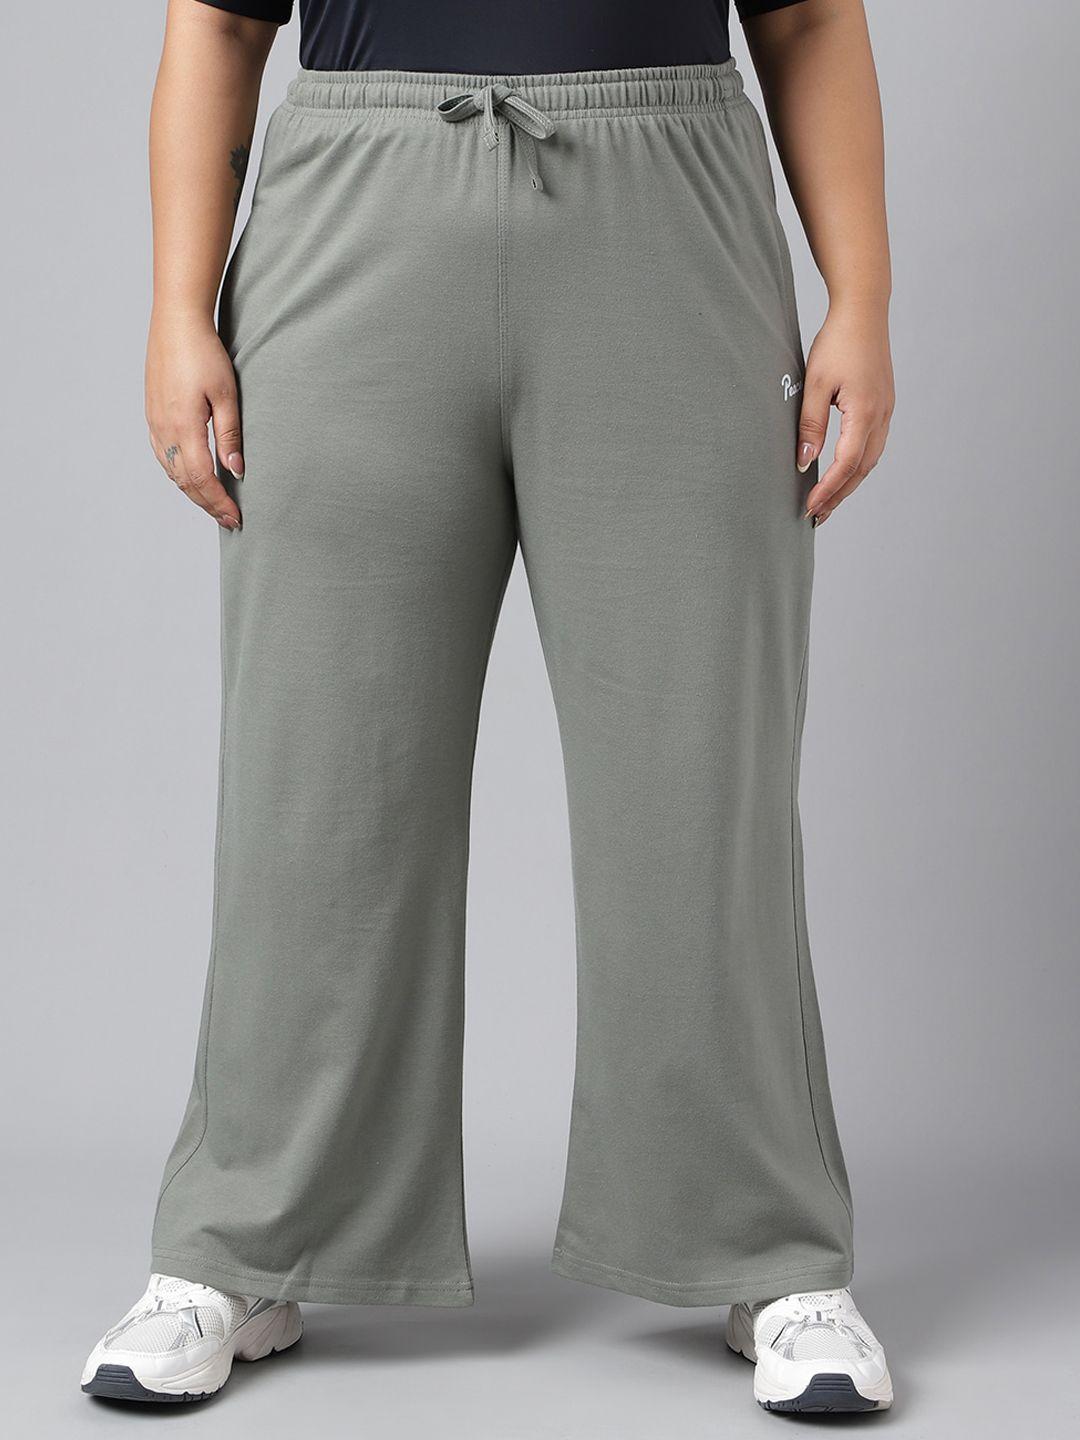 mkh-women-plus-size-wide-leg-relaxed-fit-sports-track-pants